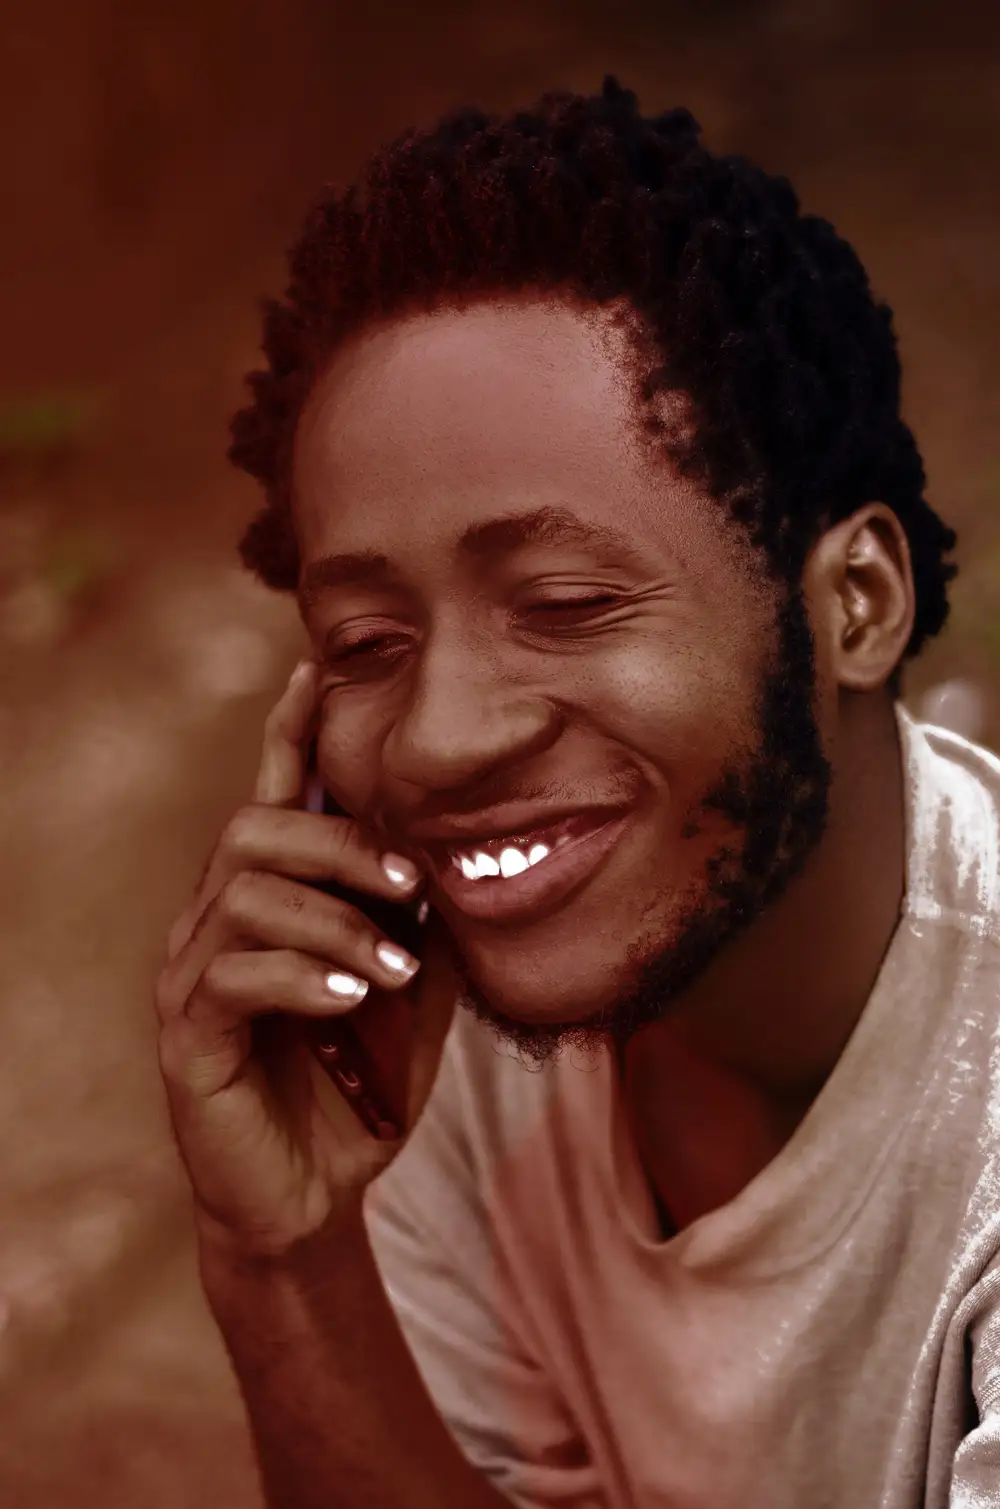 Man smiling on a call